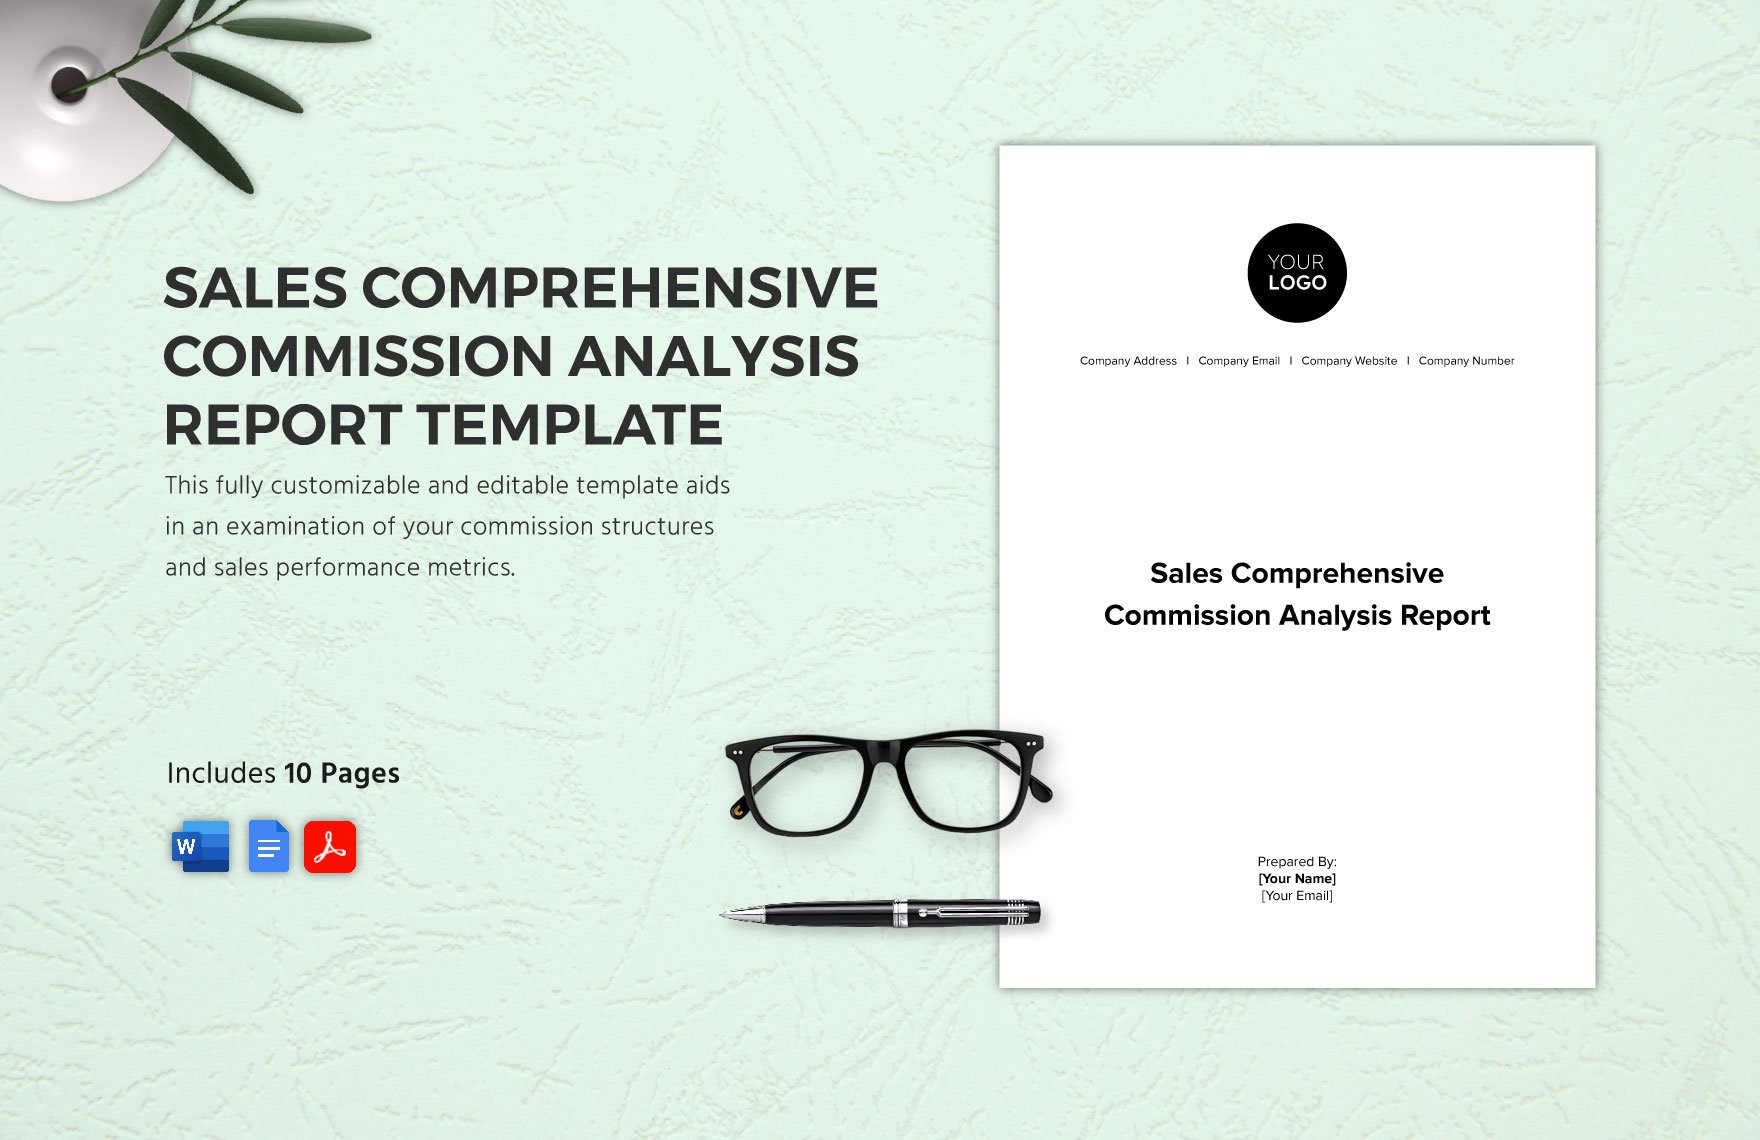 Sales Comprehensive Commission Analysis Report Template